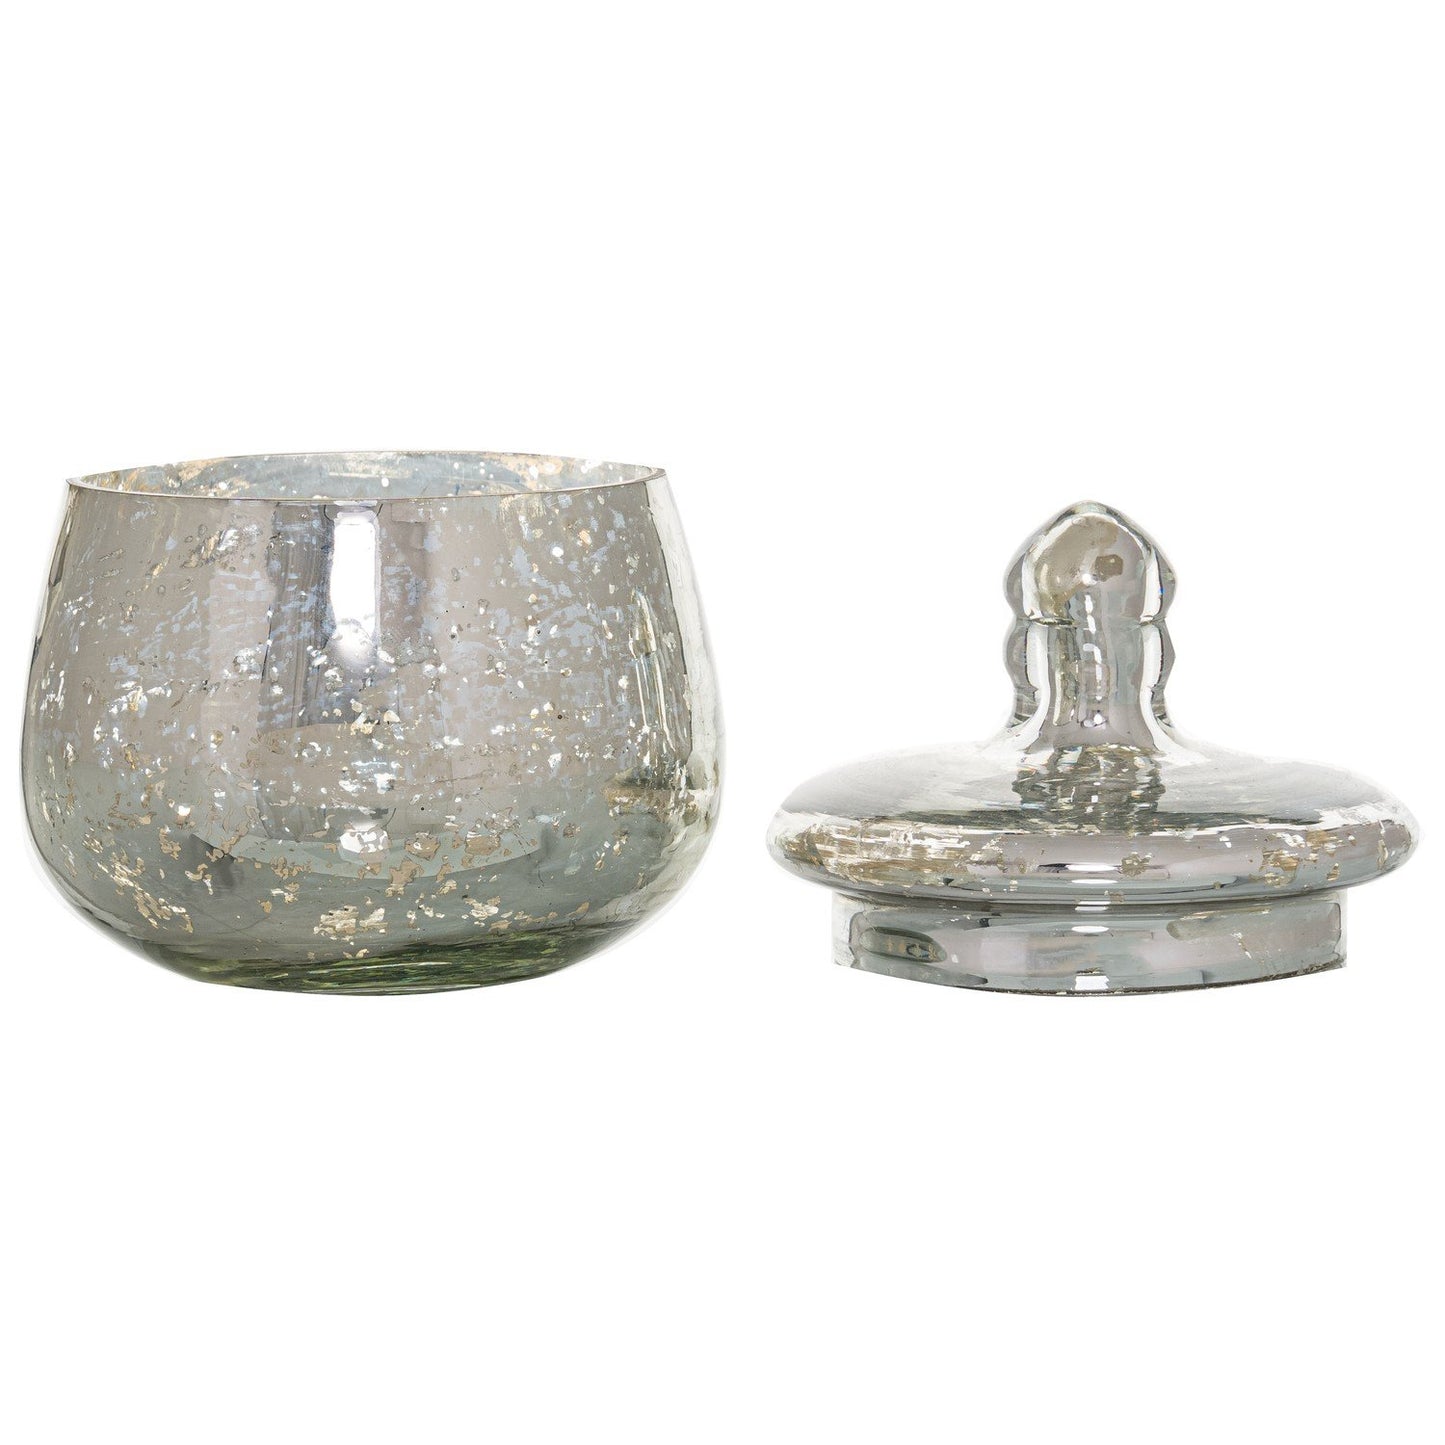 The Noel Collection Small Silver Bulbous Trinket Jar